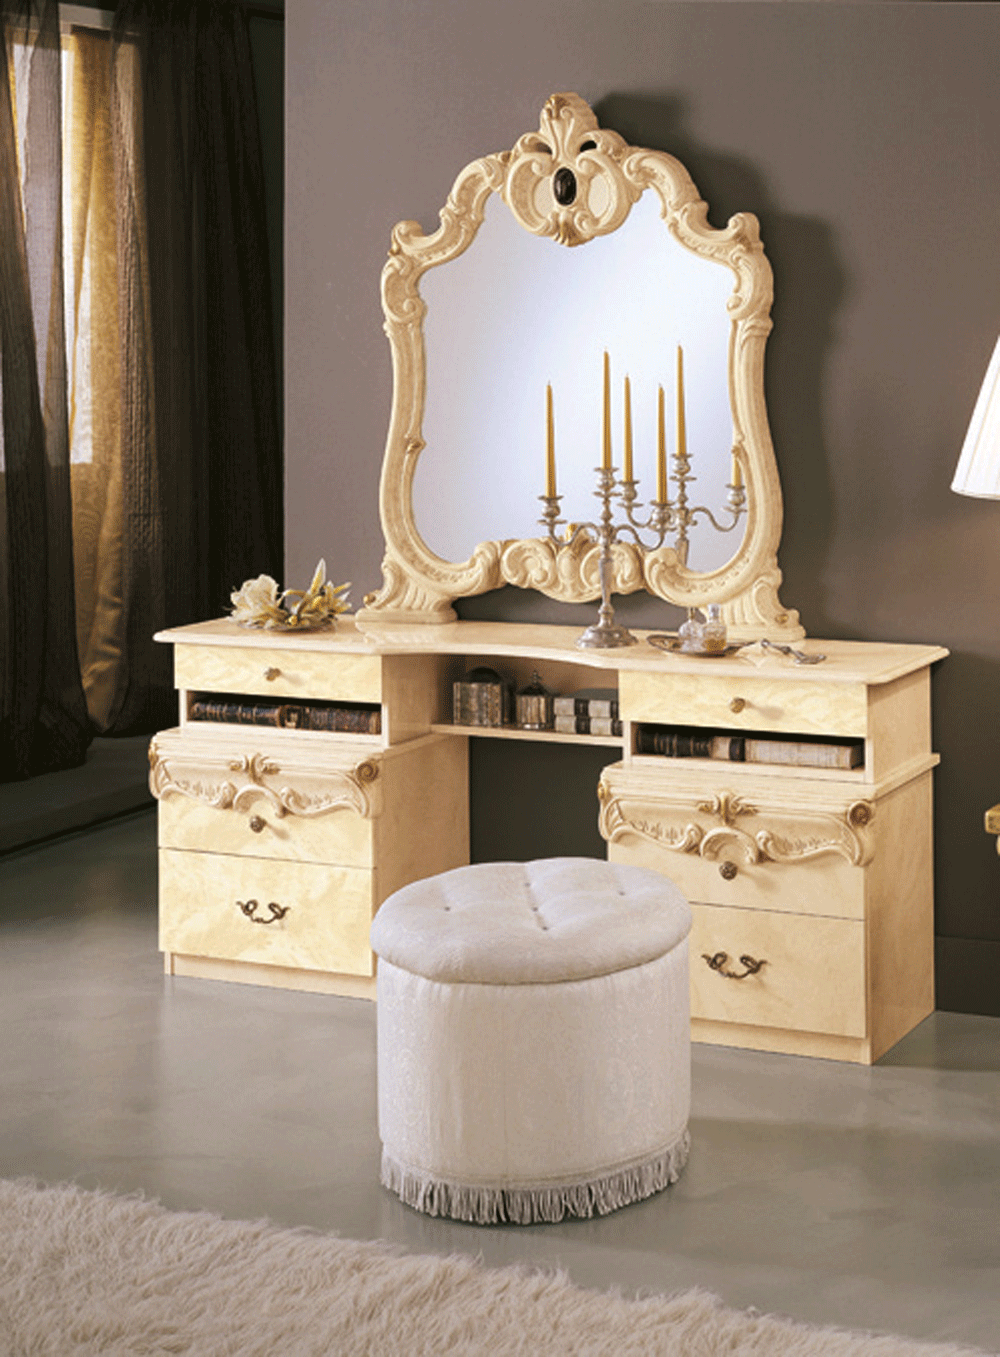 Wallunits Hallway Console tables and Mirrors Barocco Vanity Dresser IVORY